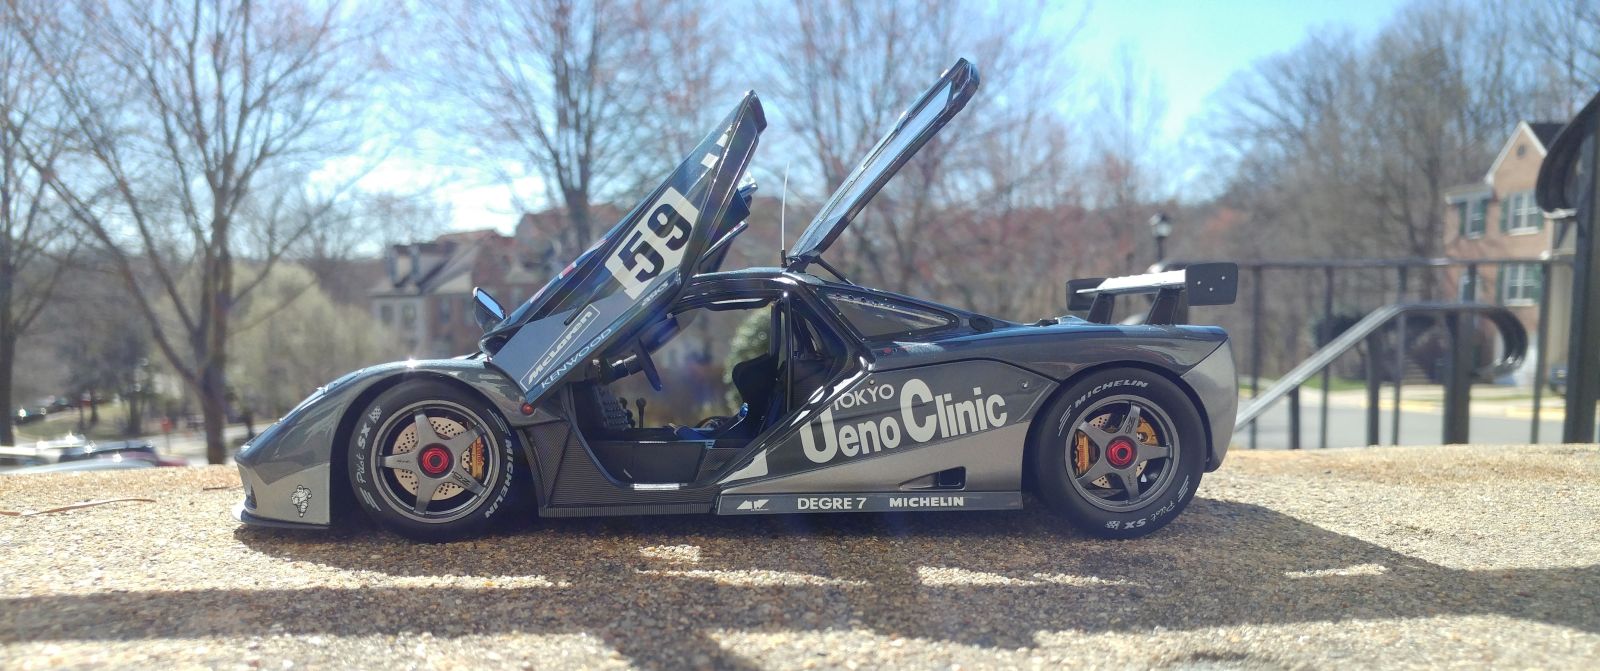 Illustration for article titled McLaren Monday: F1 GTR Ueno Clinic